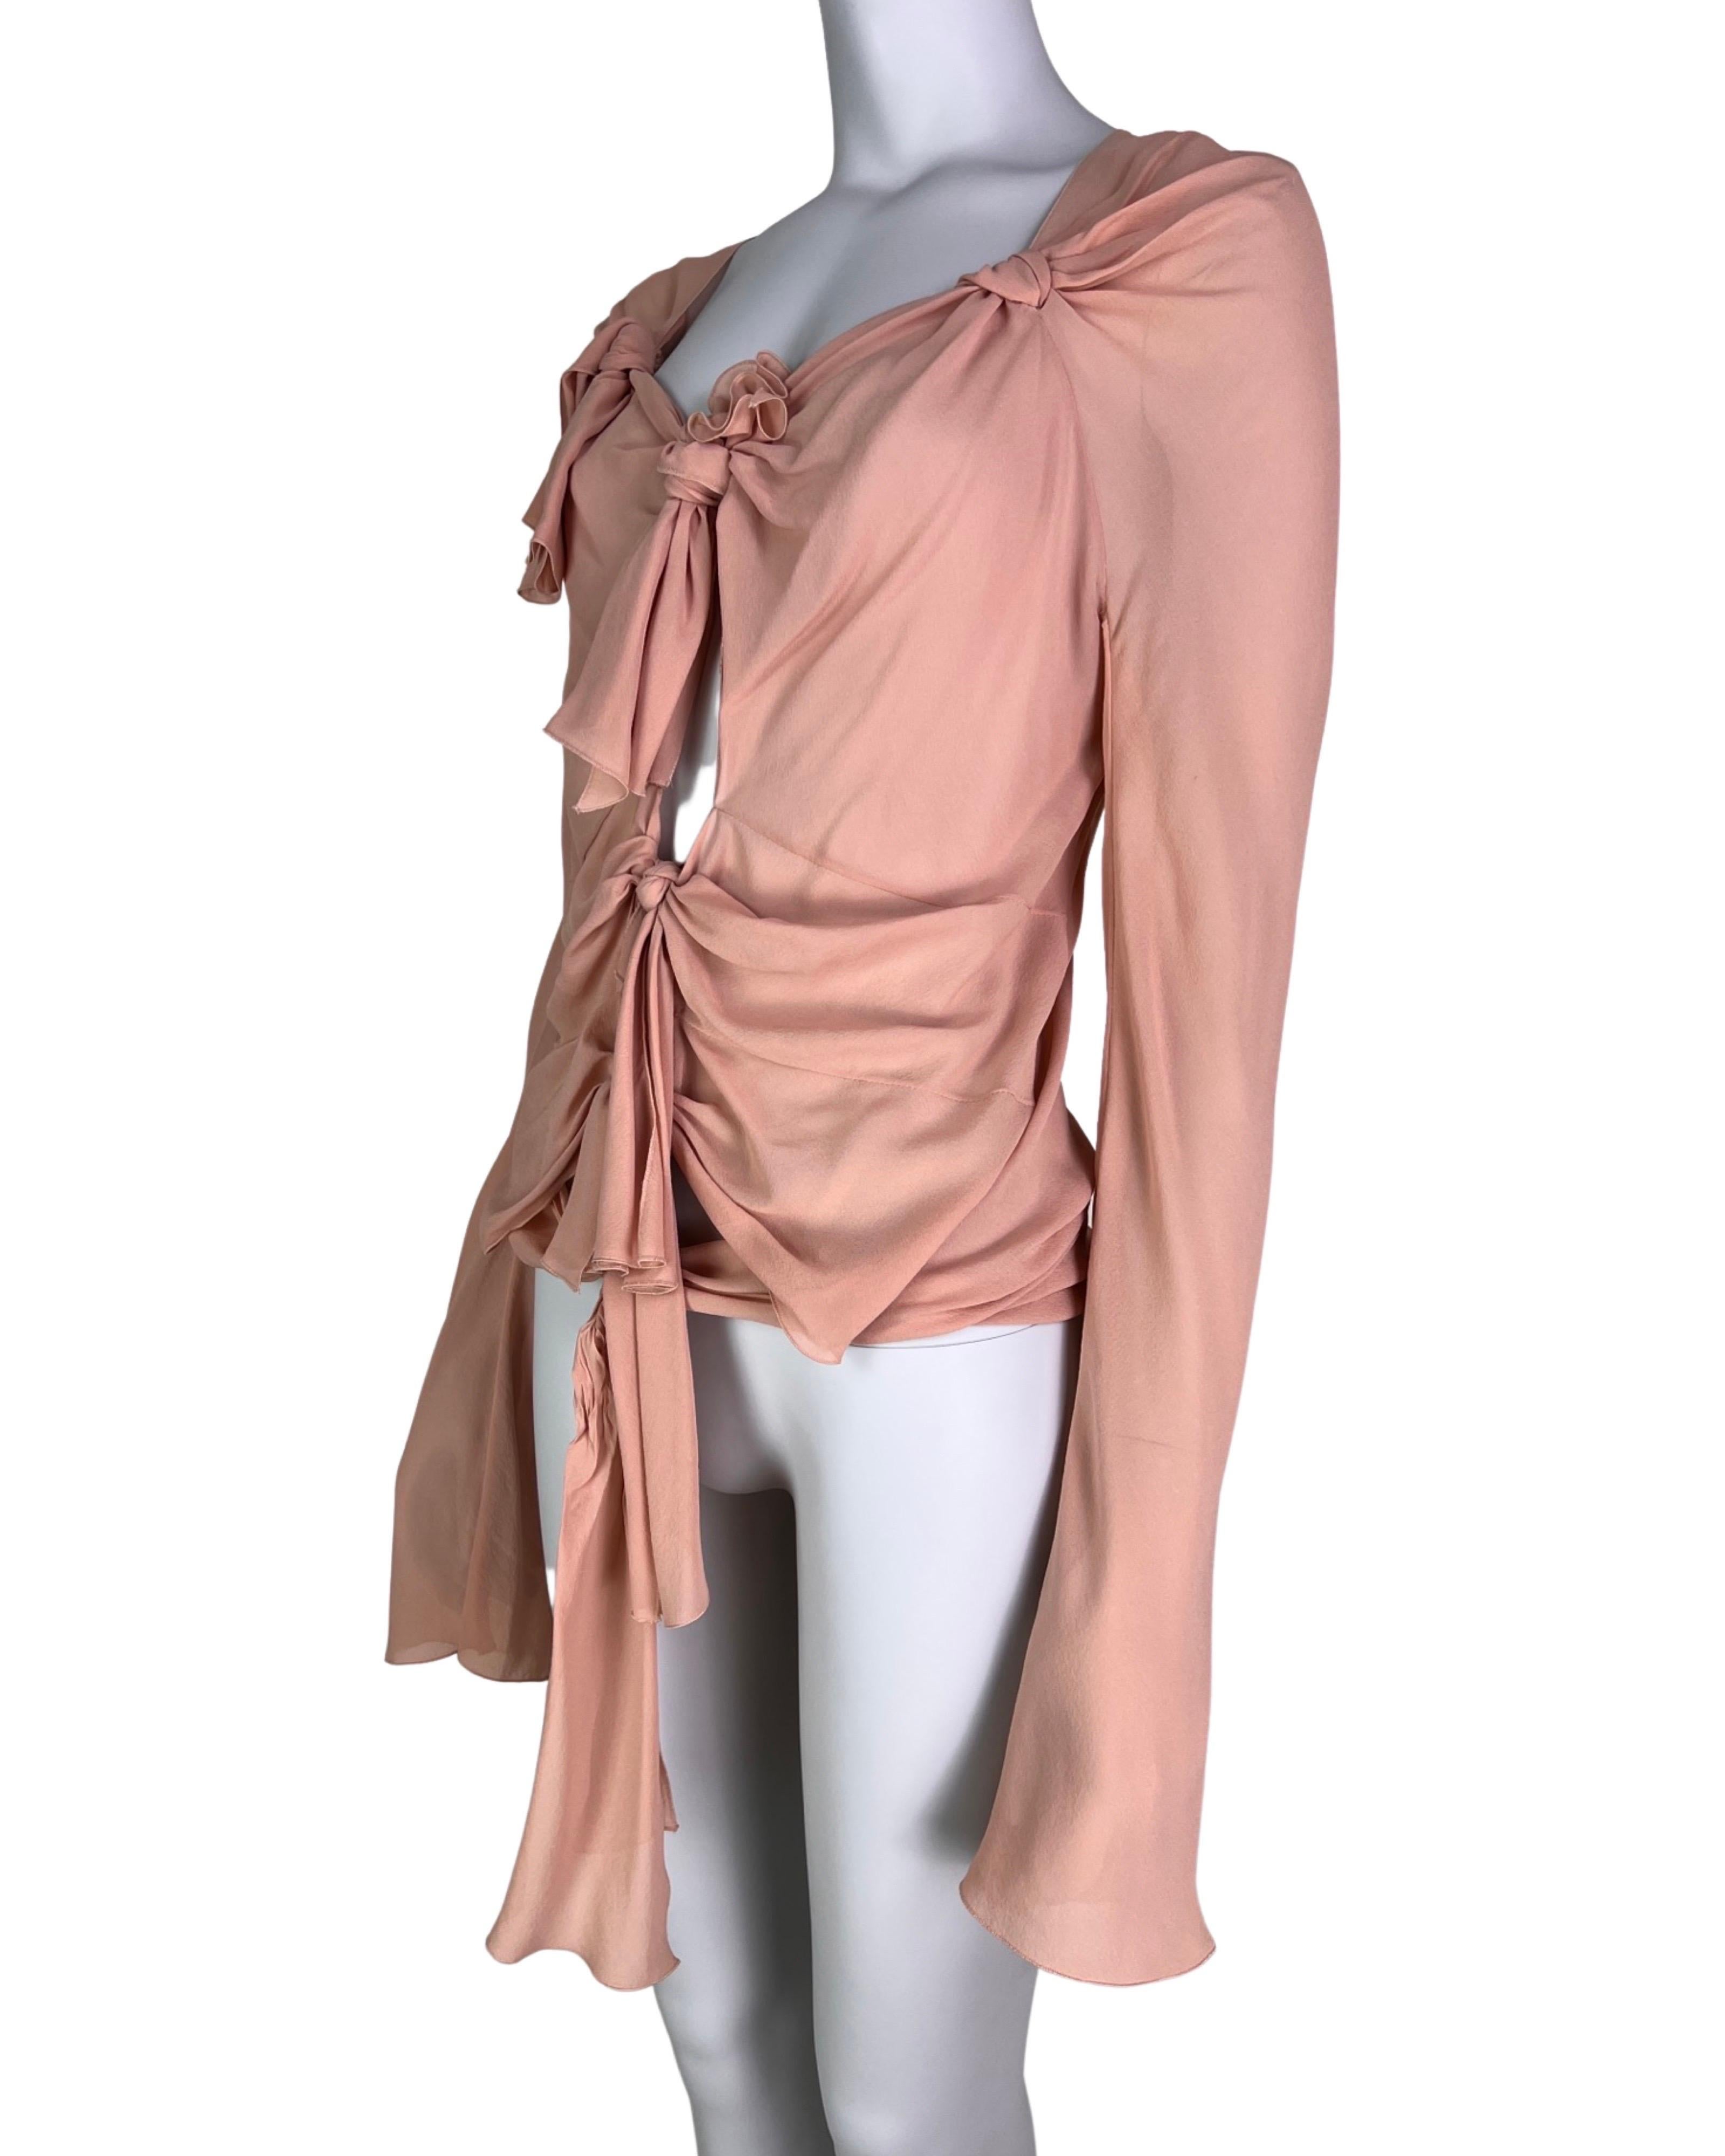 Dior by John Galliano Spring 2003 SIlk Blouse For Sale 2